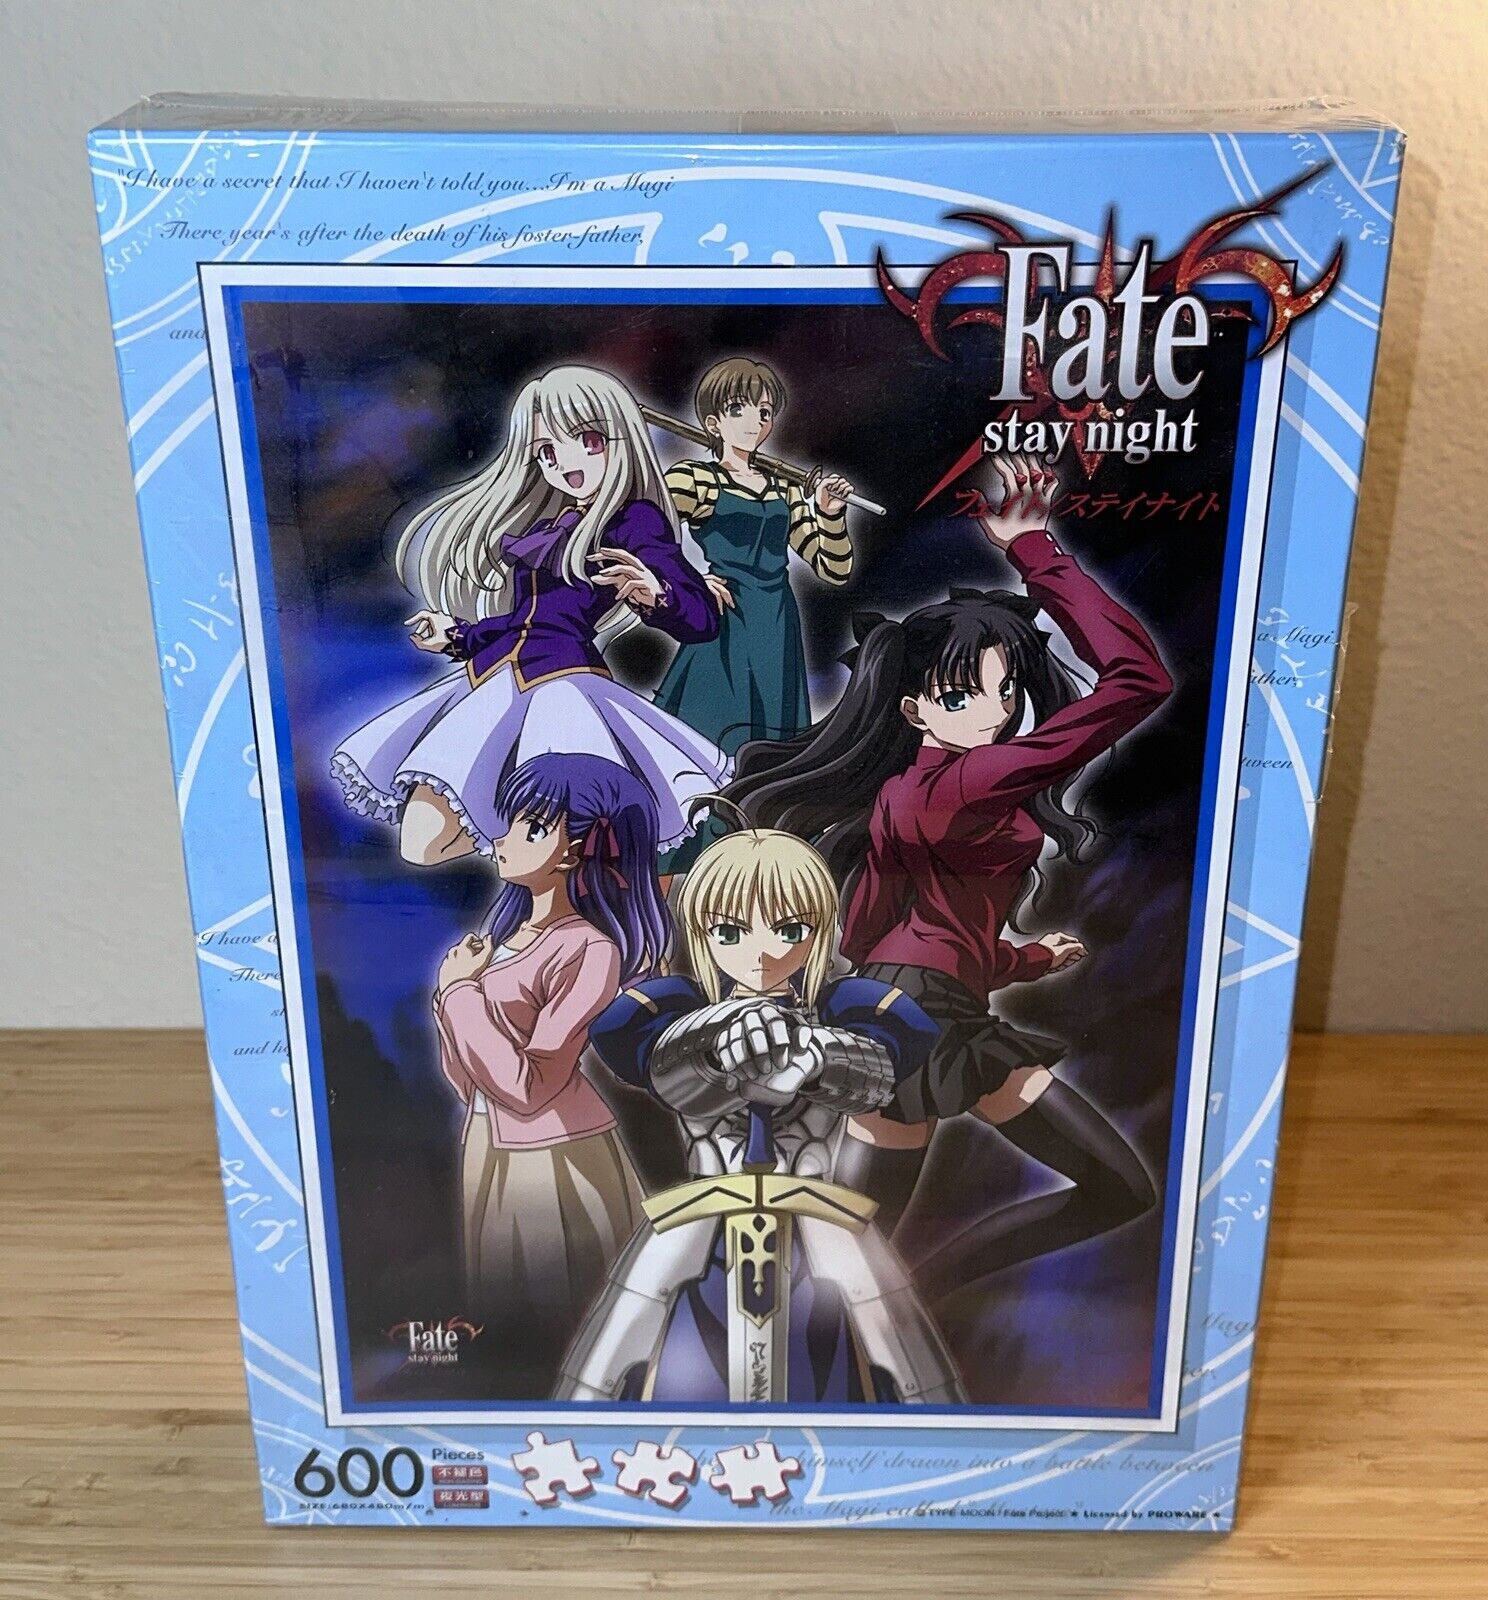 Fate/Stay Night Anime 600 Piece Puzzle, Sealed in Box Never Opened.